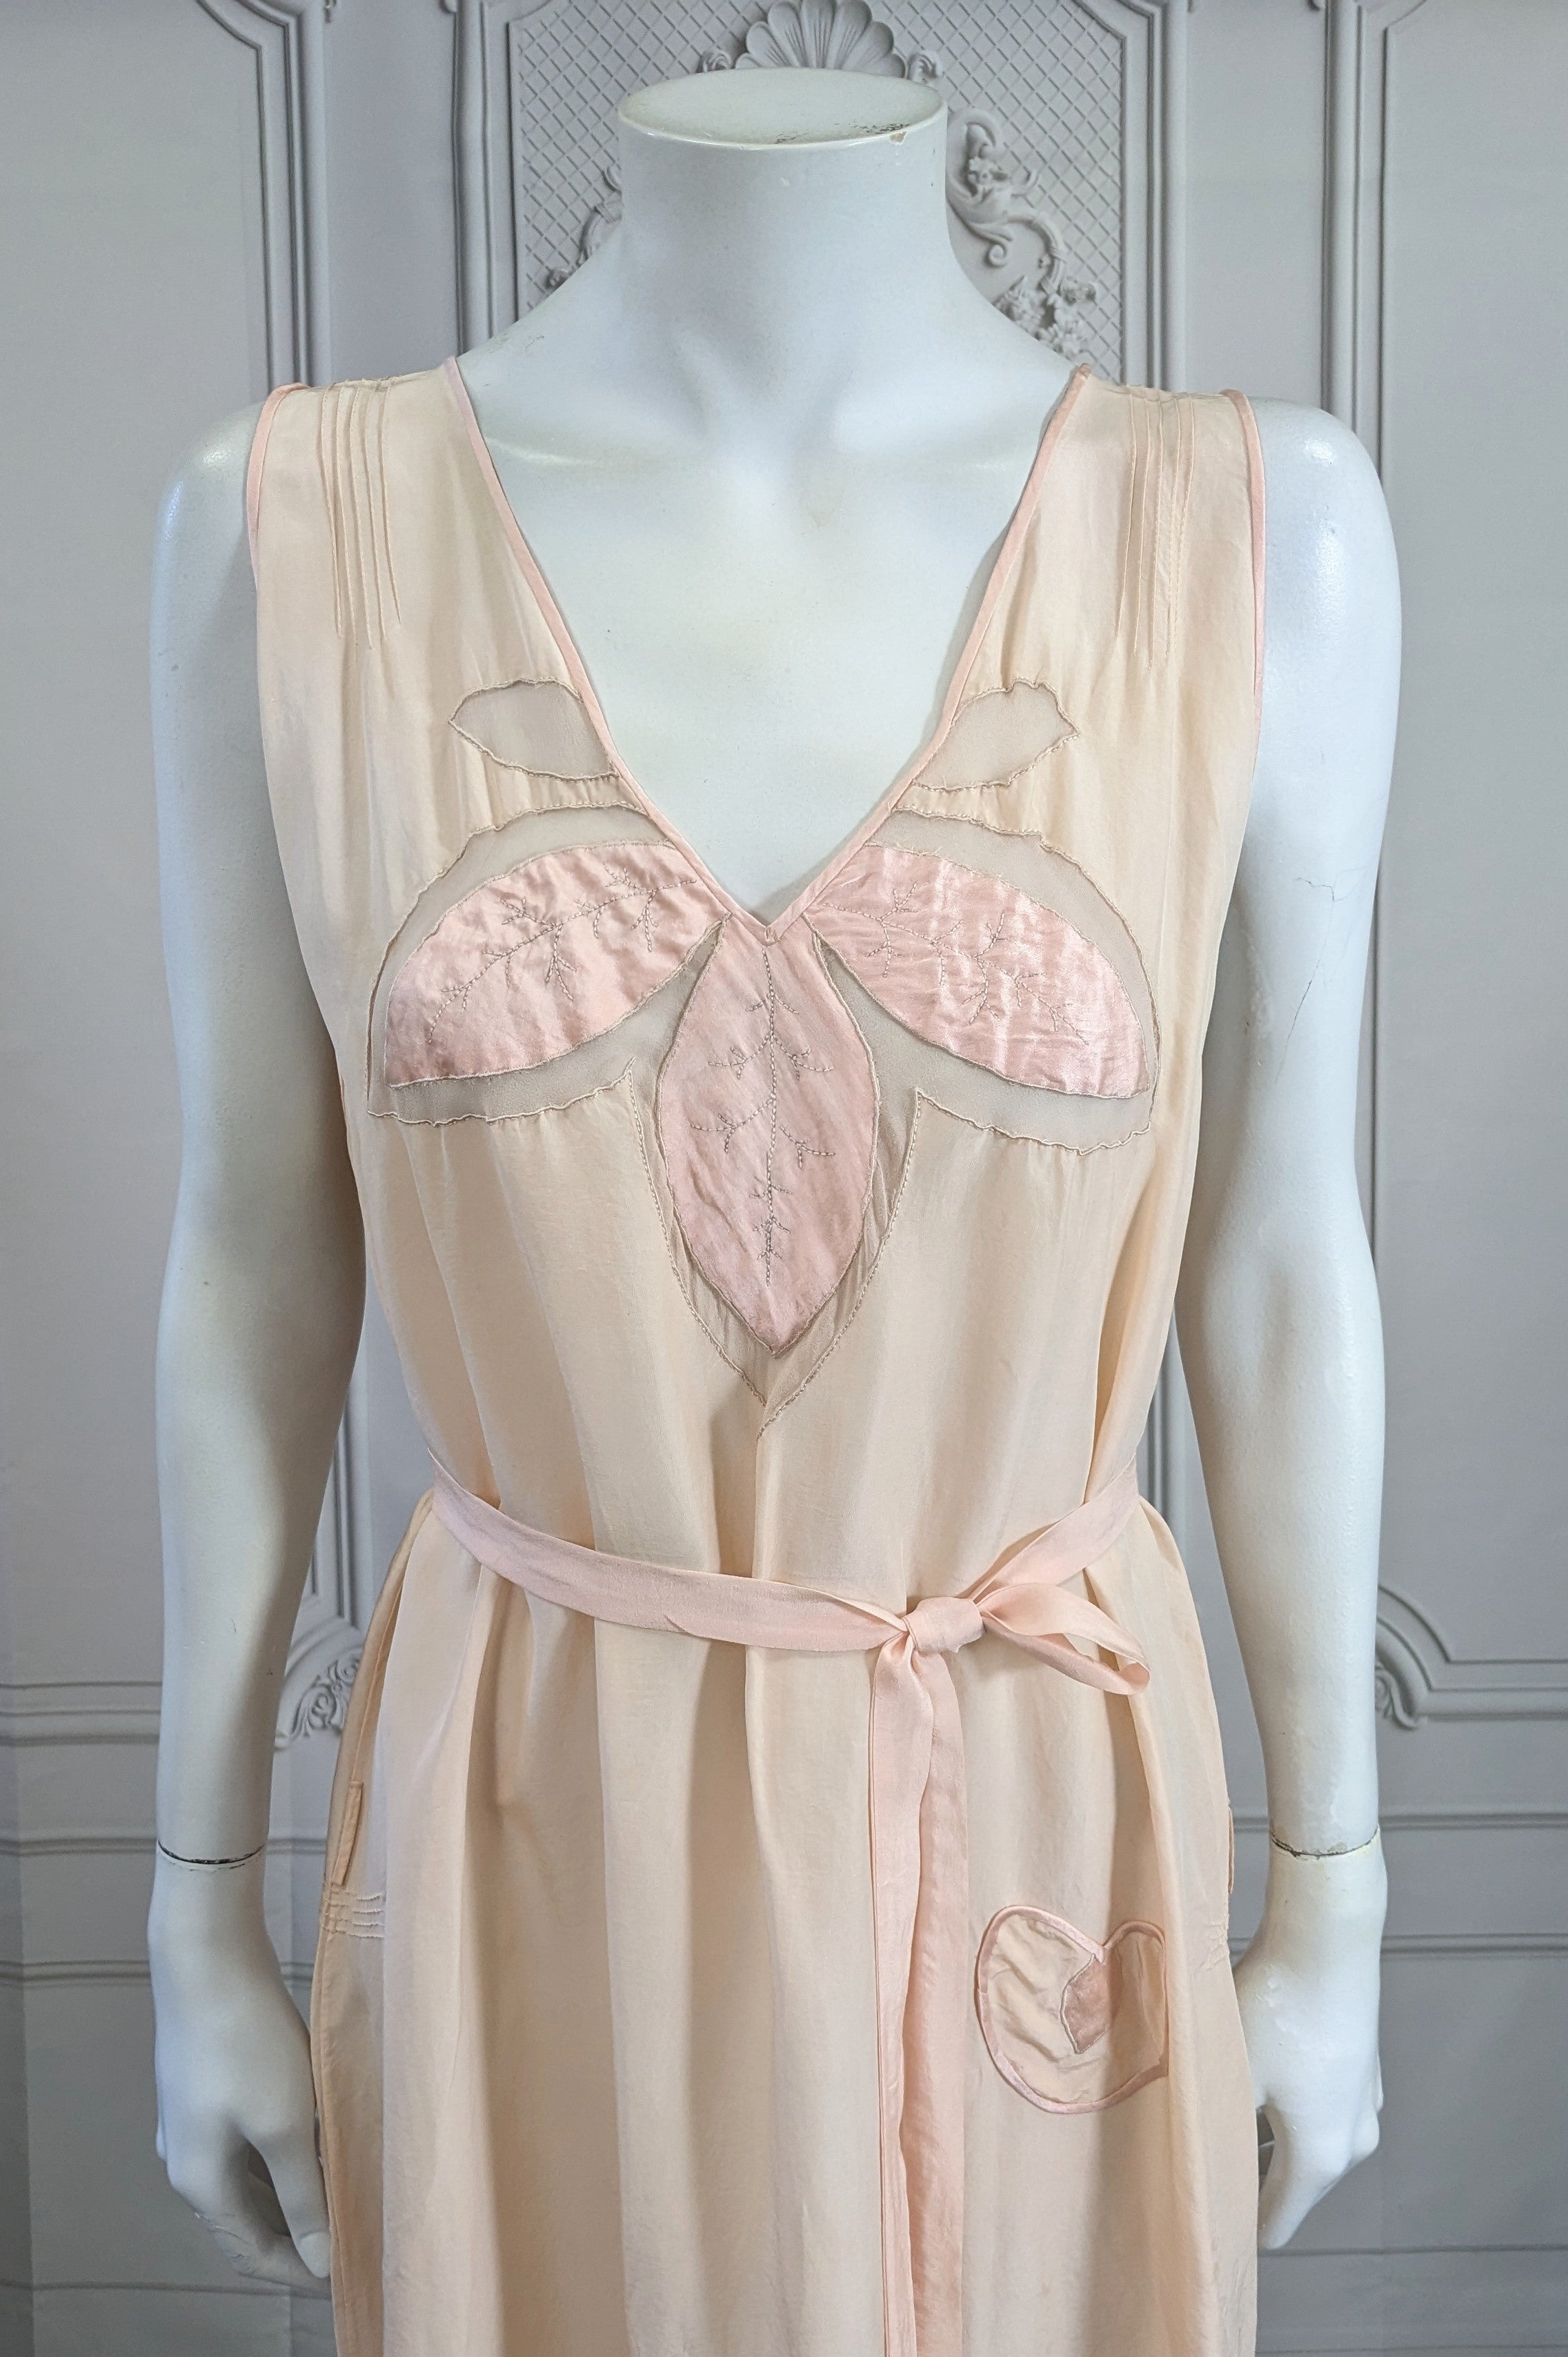 Art Deco Silk and Chiffon Slip Dress with easy fit and self belt. Easy slip over styling with deep armholes and large straight cut. A floral silk satin motif is hand embroidered with chiffon sheer inserts on bodice with heart shaped pocket. Great